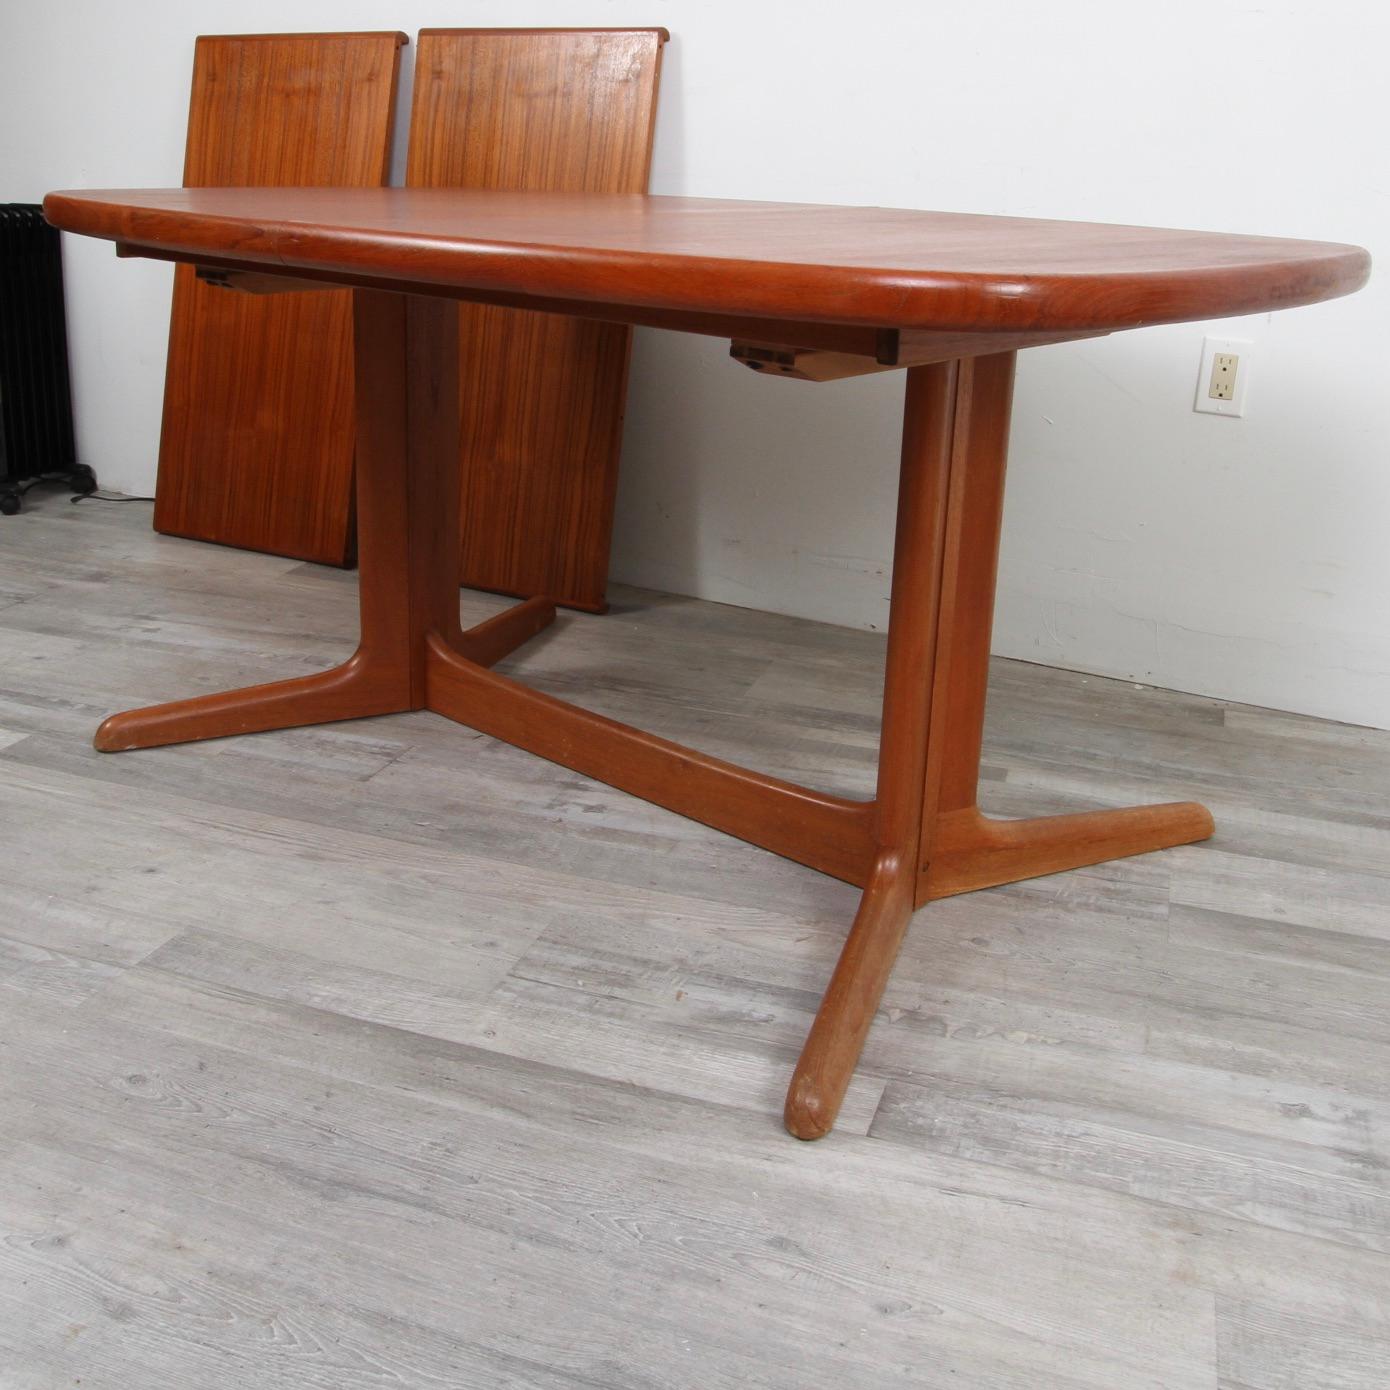 Mid-Century Modern  Danish Teak Oval Dining Table from Rasmus Solberg, 1960s For Sale